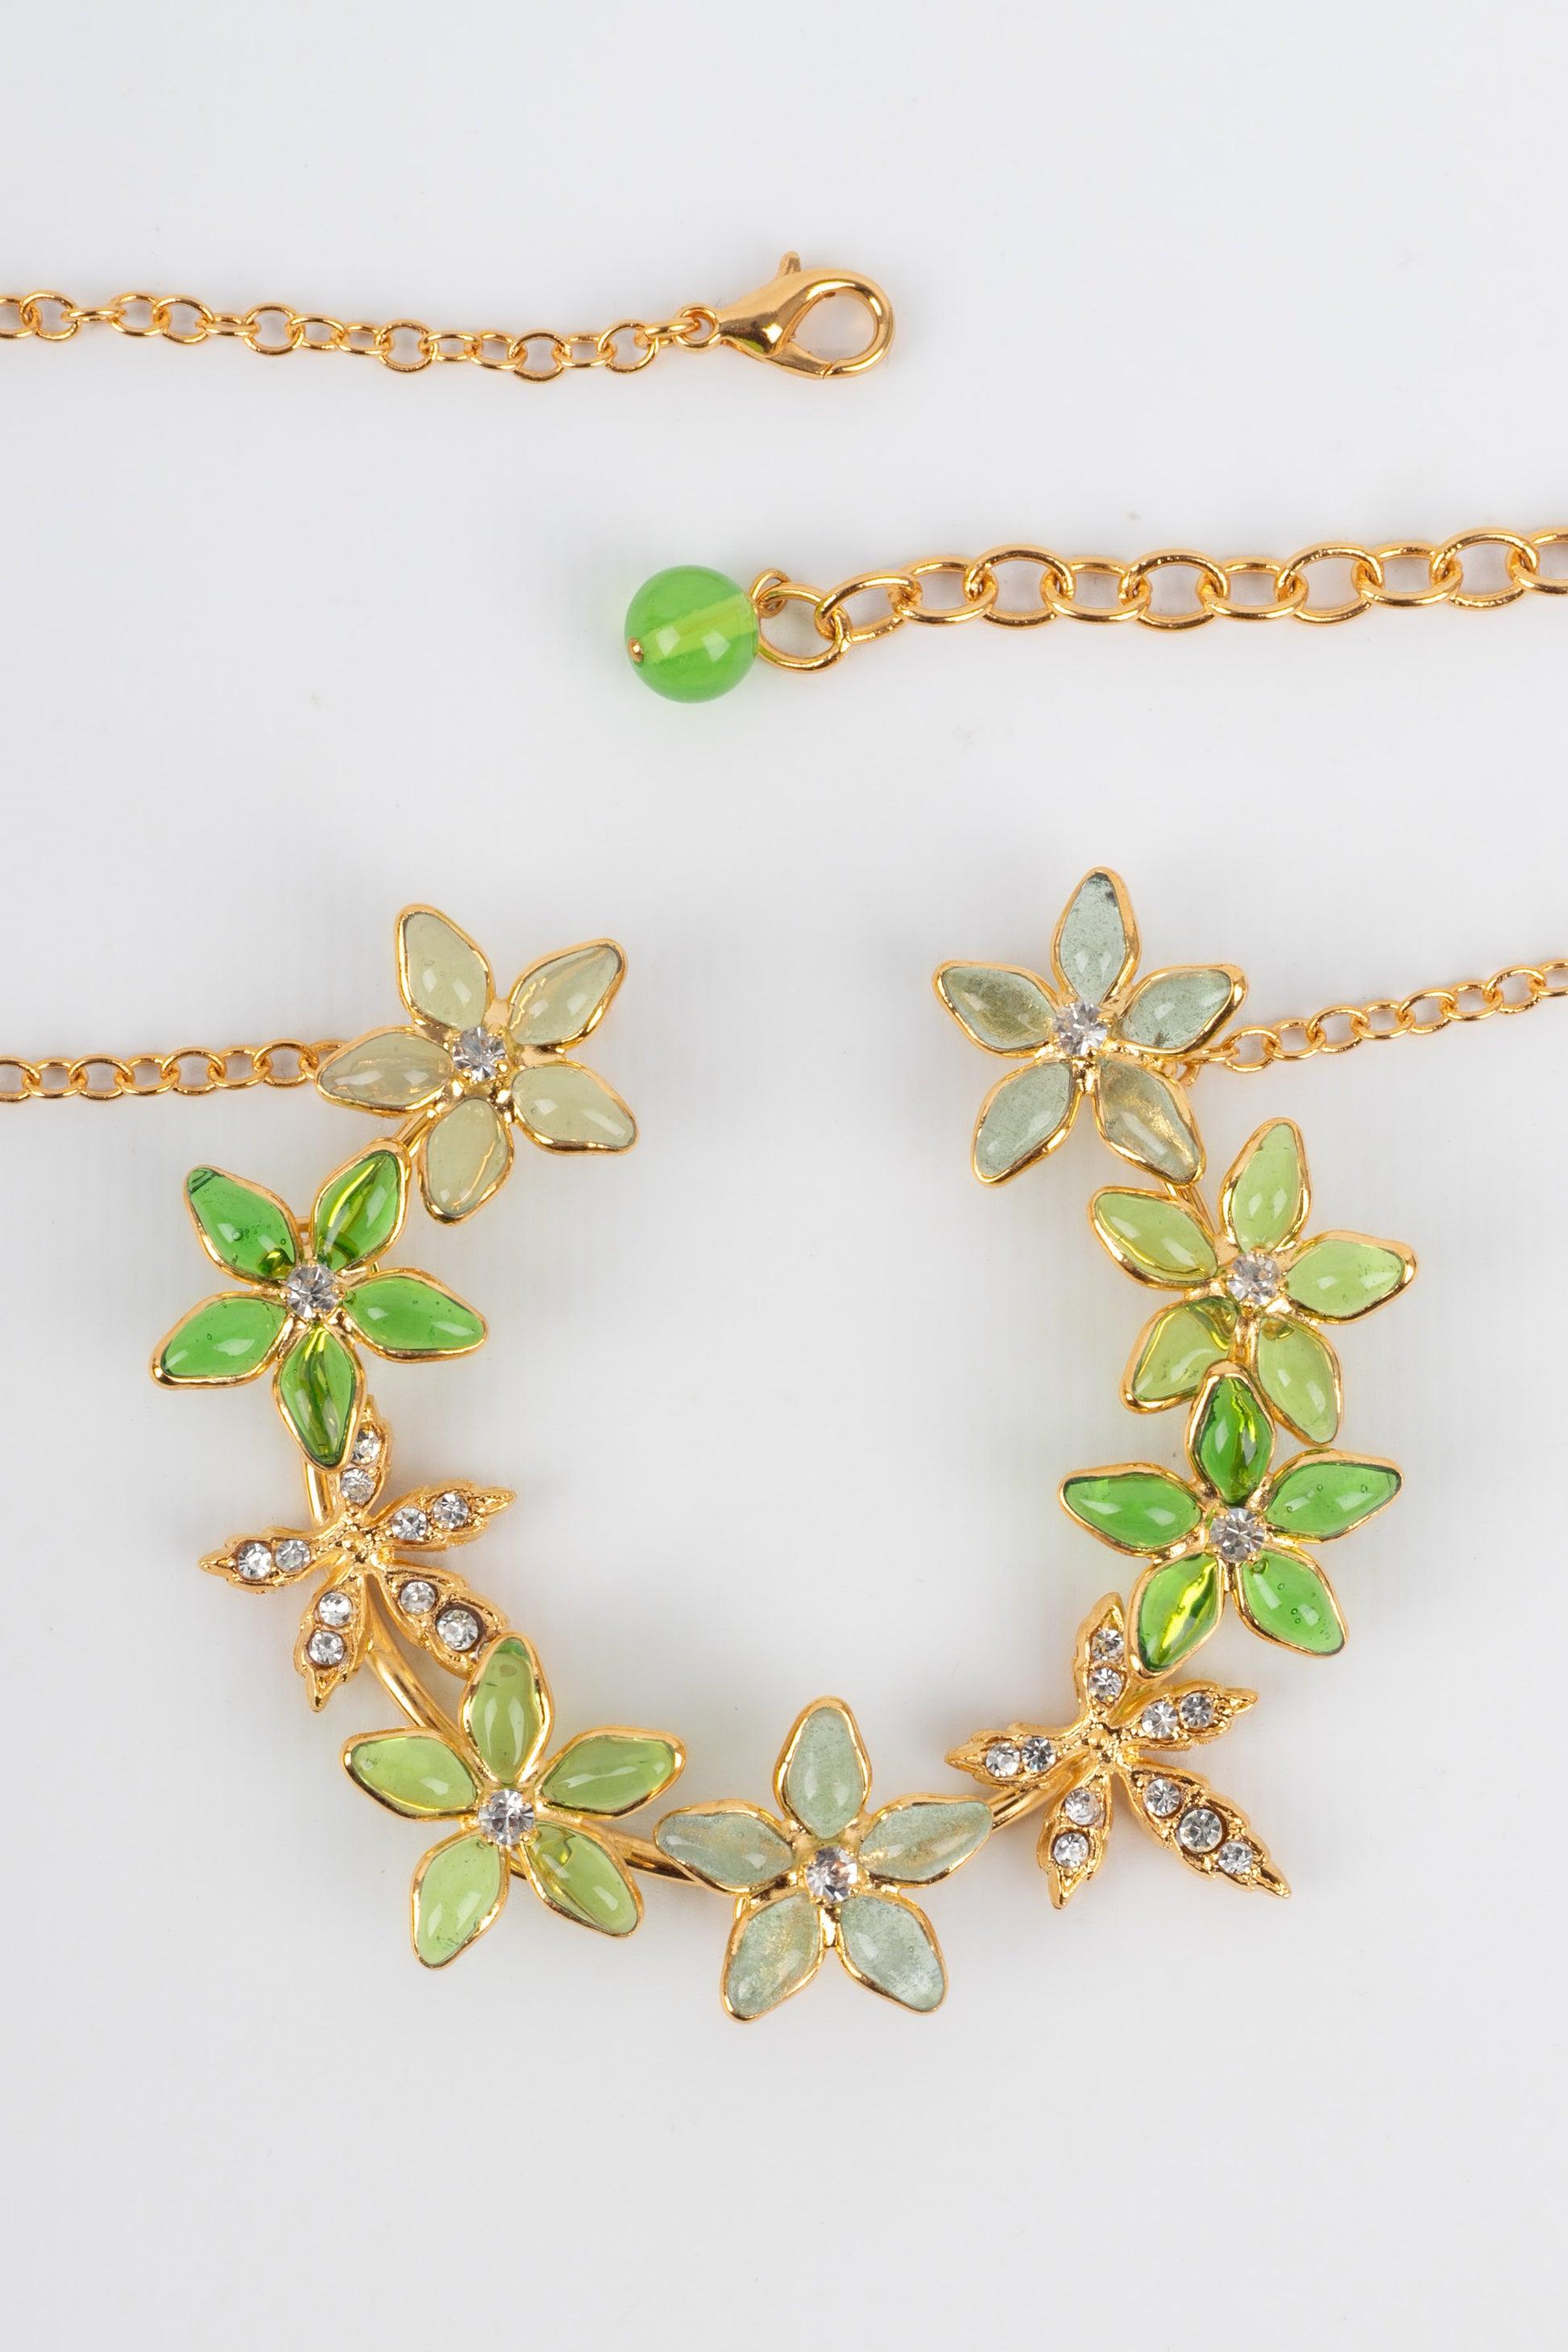 Women's Augustine Golden Metal Necklace with Rhinestones and Glass Paste in Green Tones For Sale